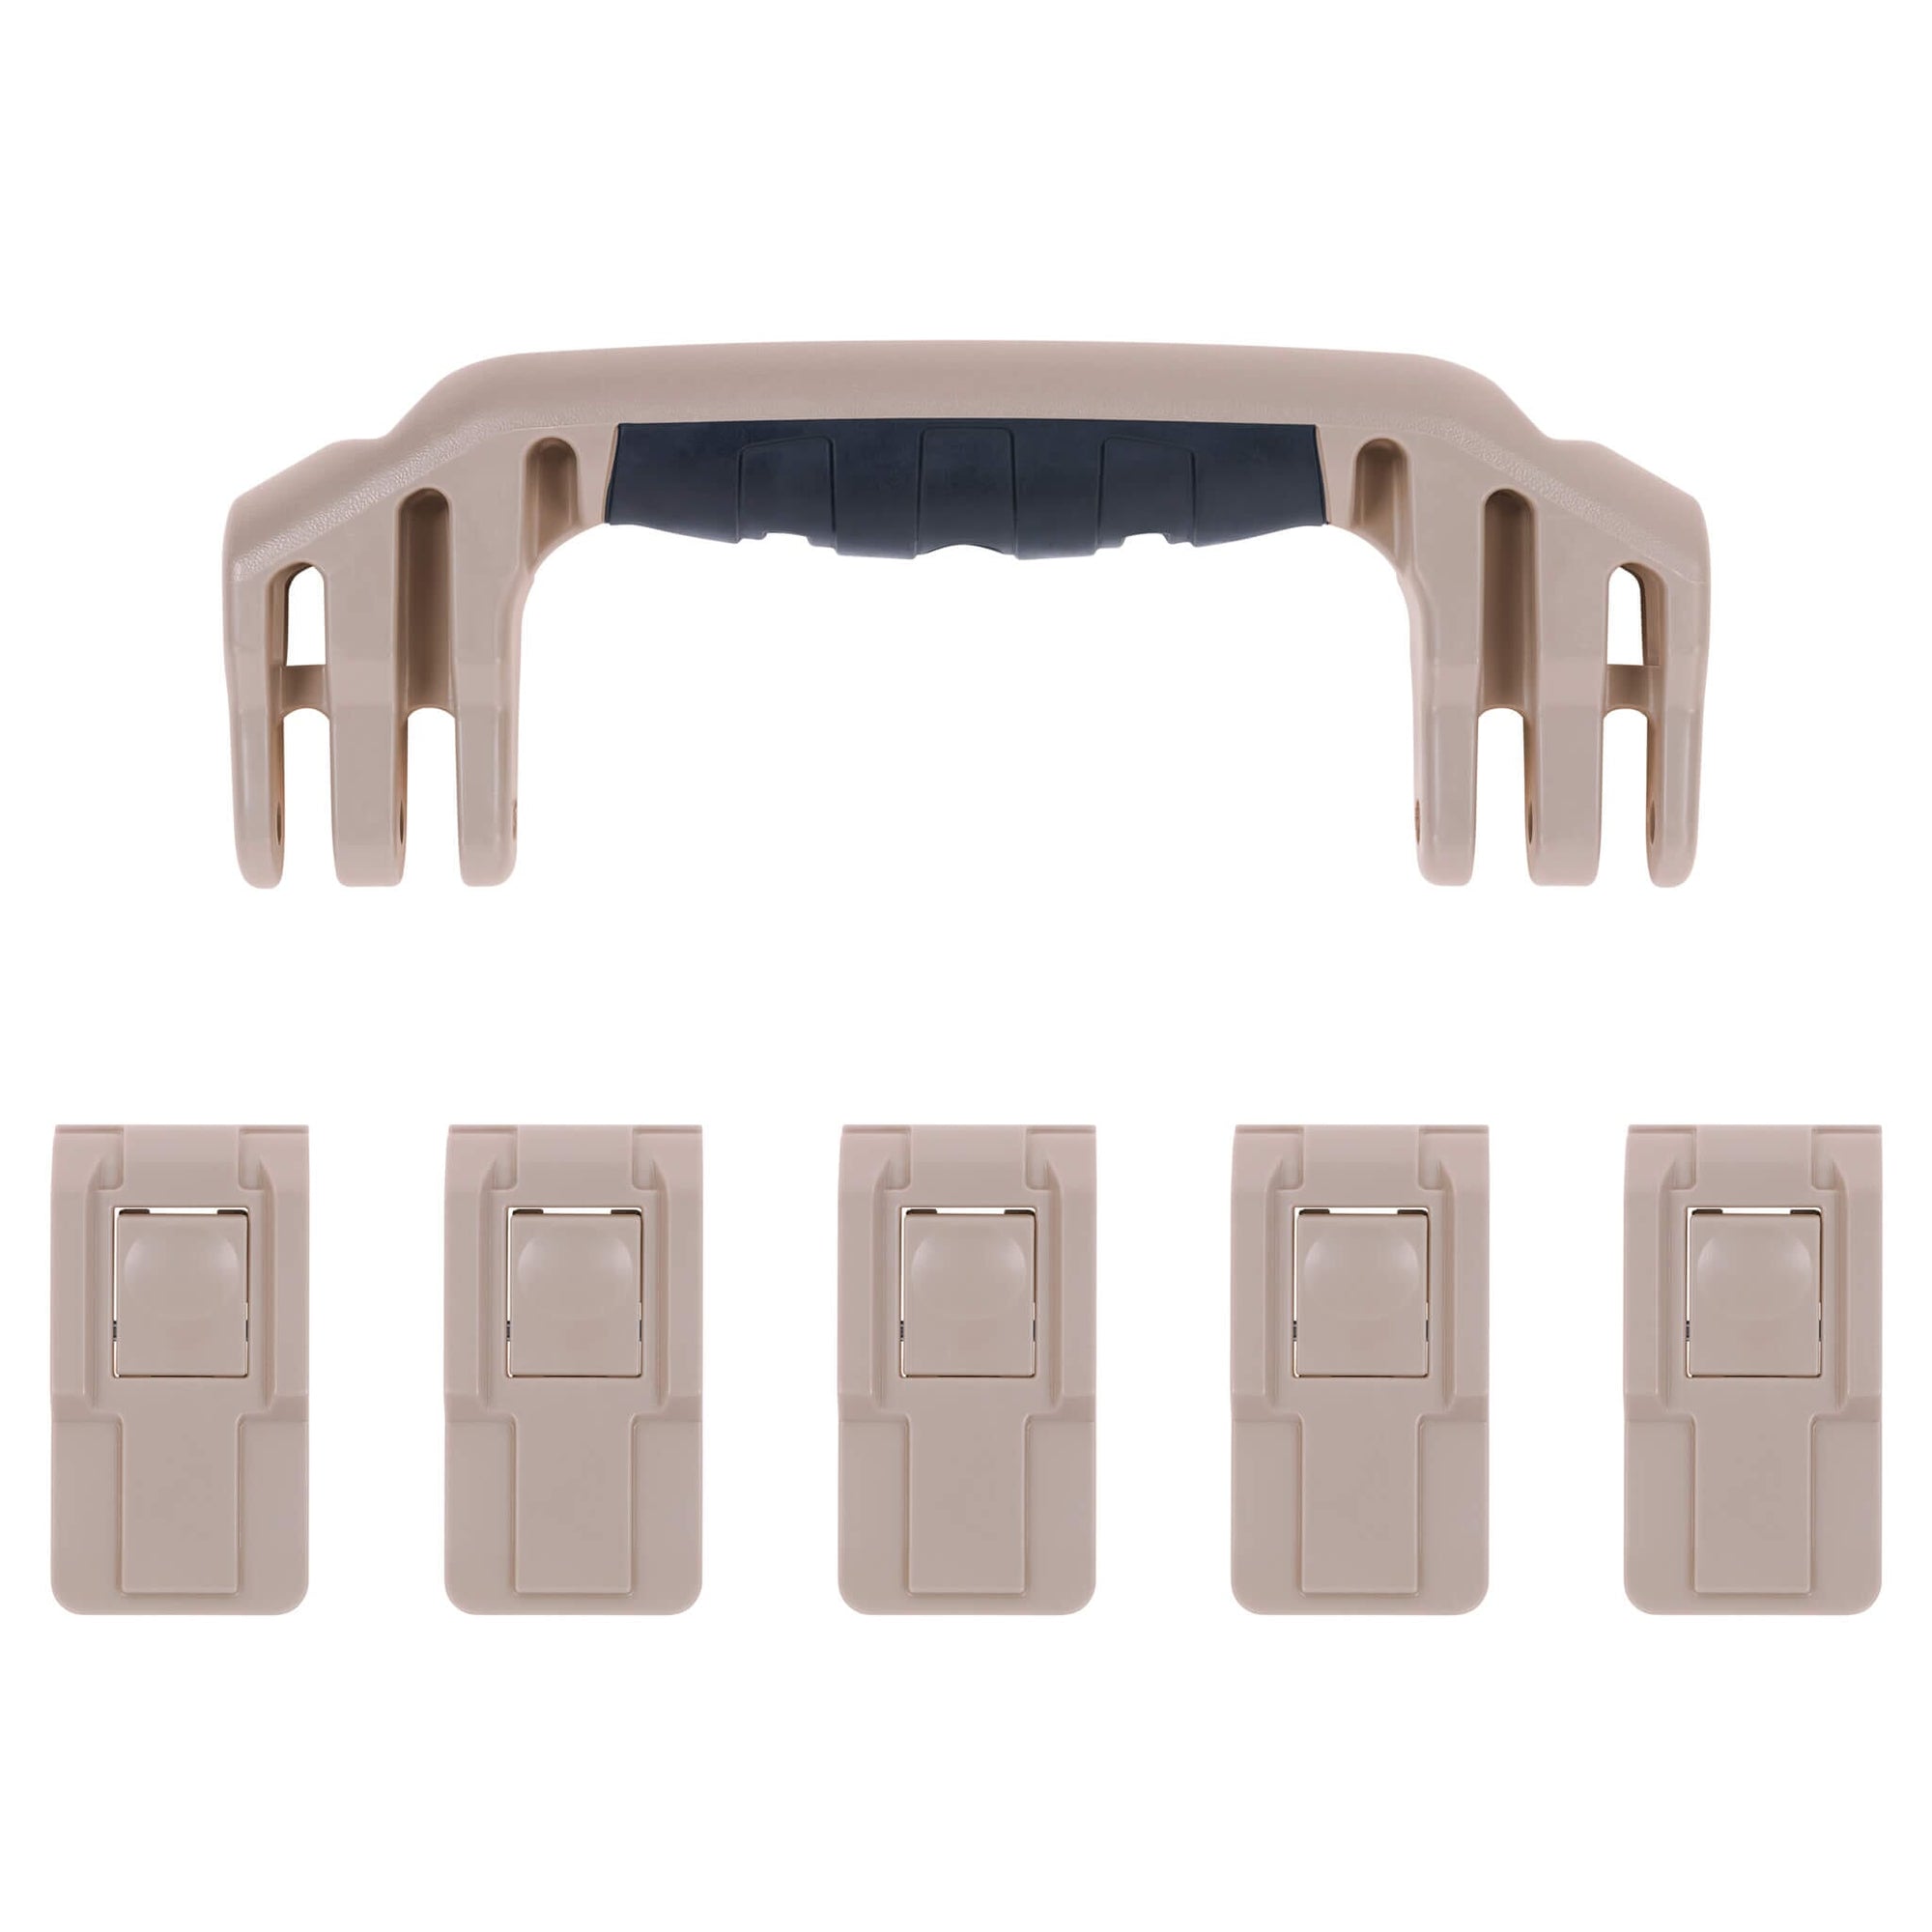 Pelican 1605 Air Replacement Handle & Latches, Desert Tan (Set of 1 Handle, 5 Latches) ColorCase 